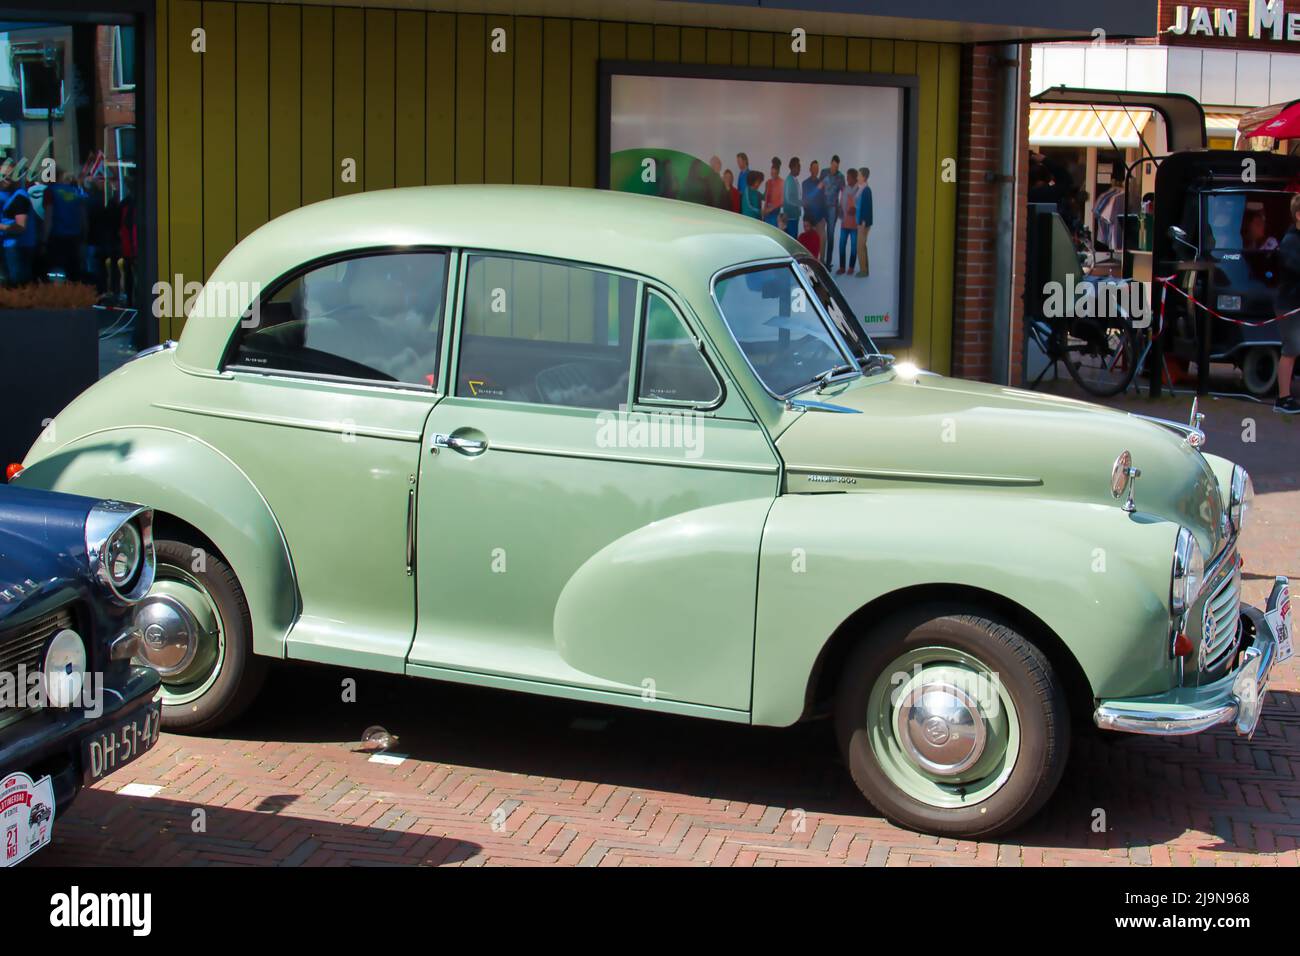 Vintage car Morris Minor 1956 at a classic car show in Uithuizen, Groningen, the Netherlands Stock Photo